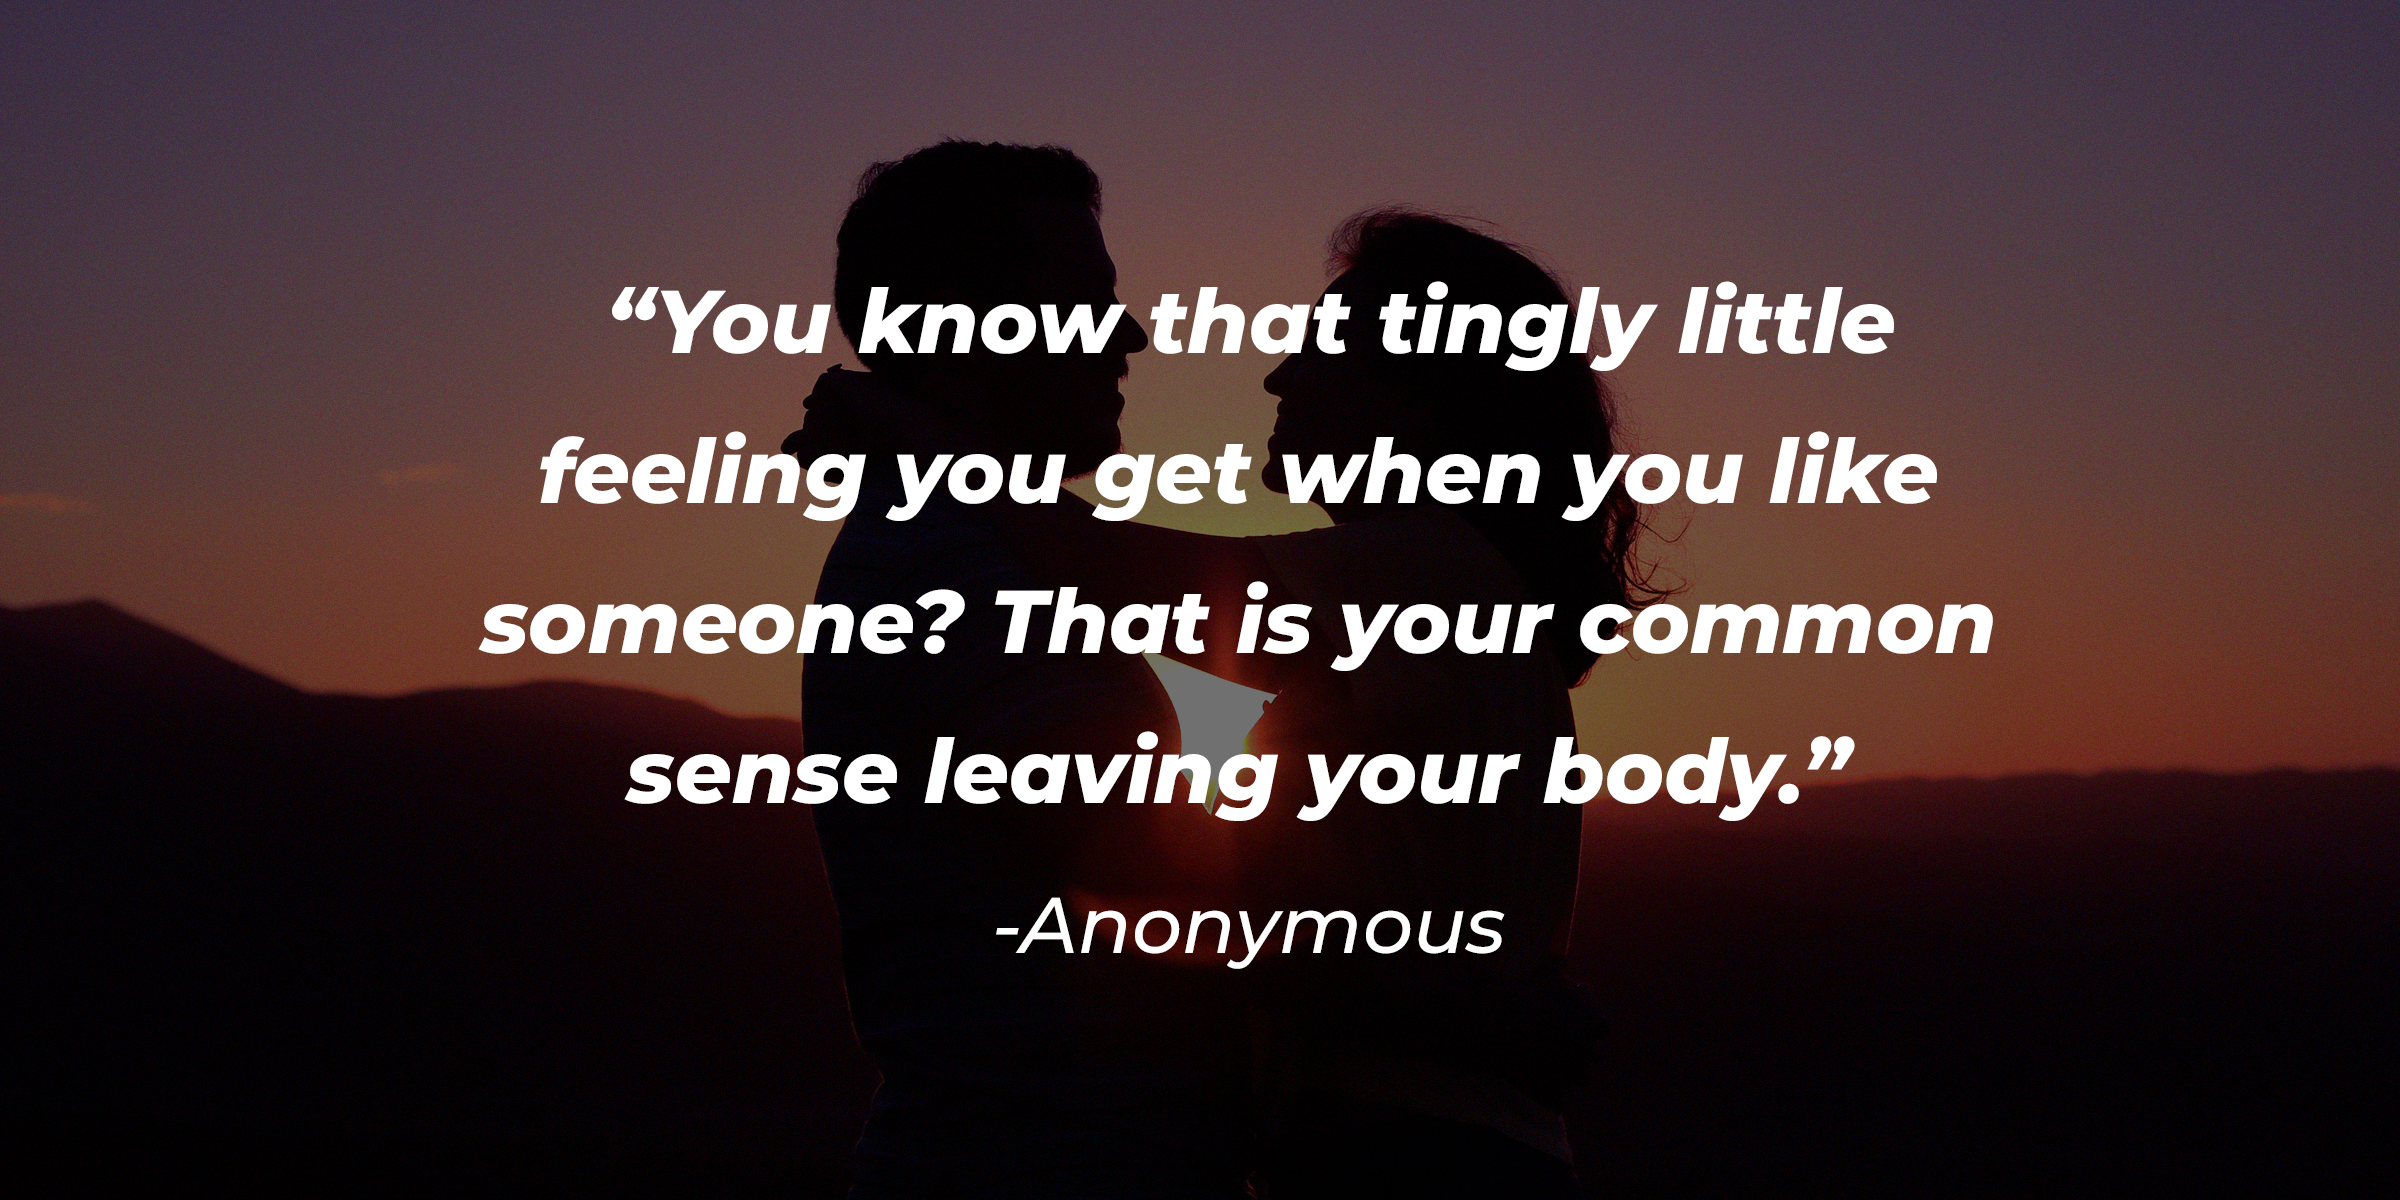 A photo of a man and woman with an Anonymous quote: “You know that tingly little feeling you get when you like someone? That is your common sense leaving your body.” | Source: unsplash.com